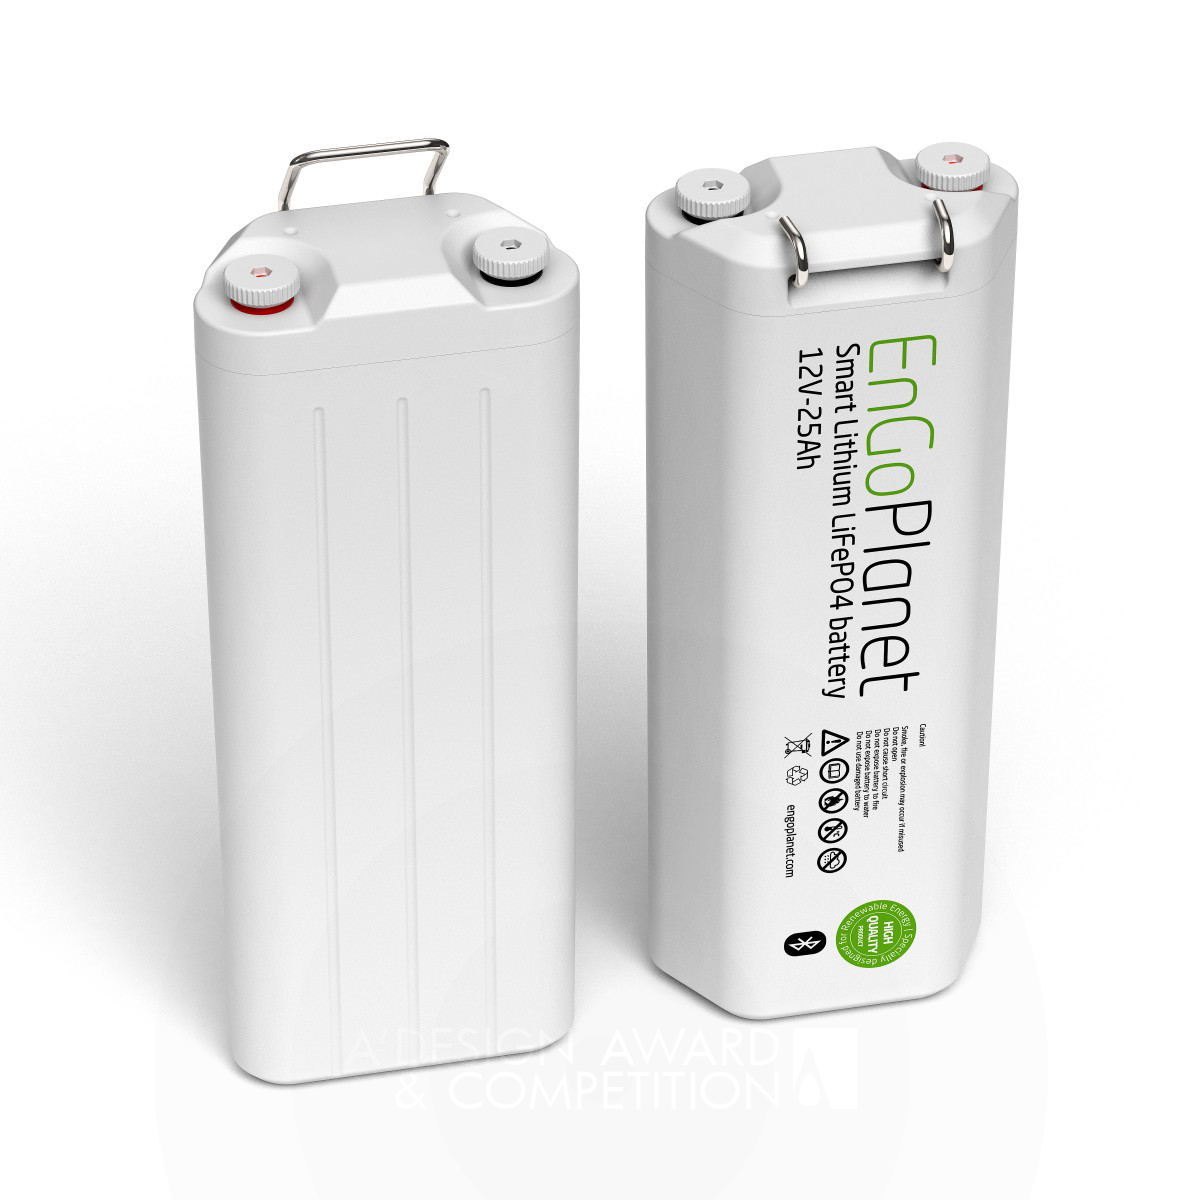 EnGo: Redefining Battery Cases for the Future